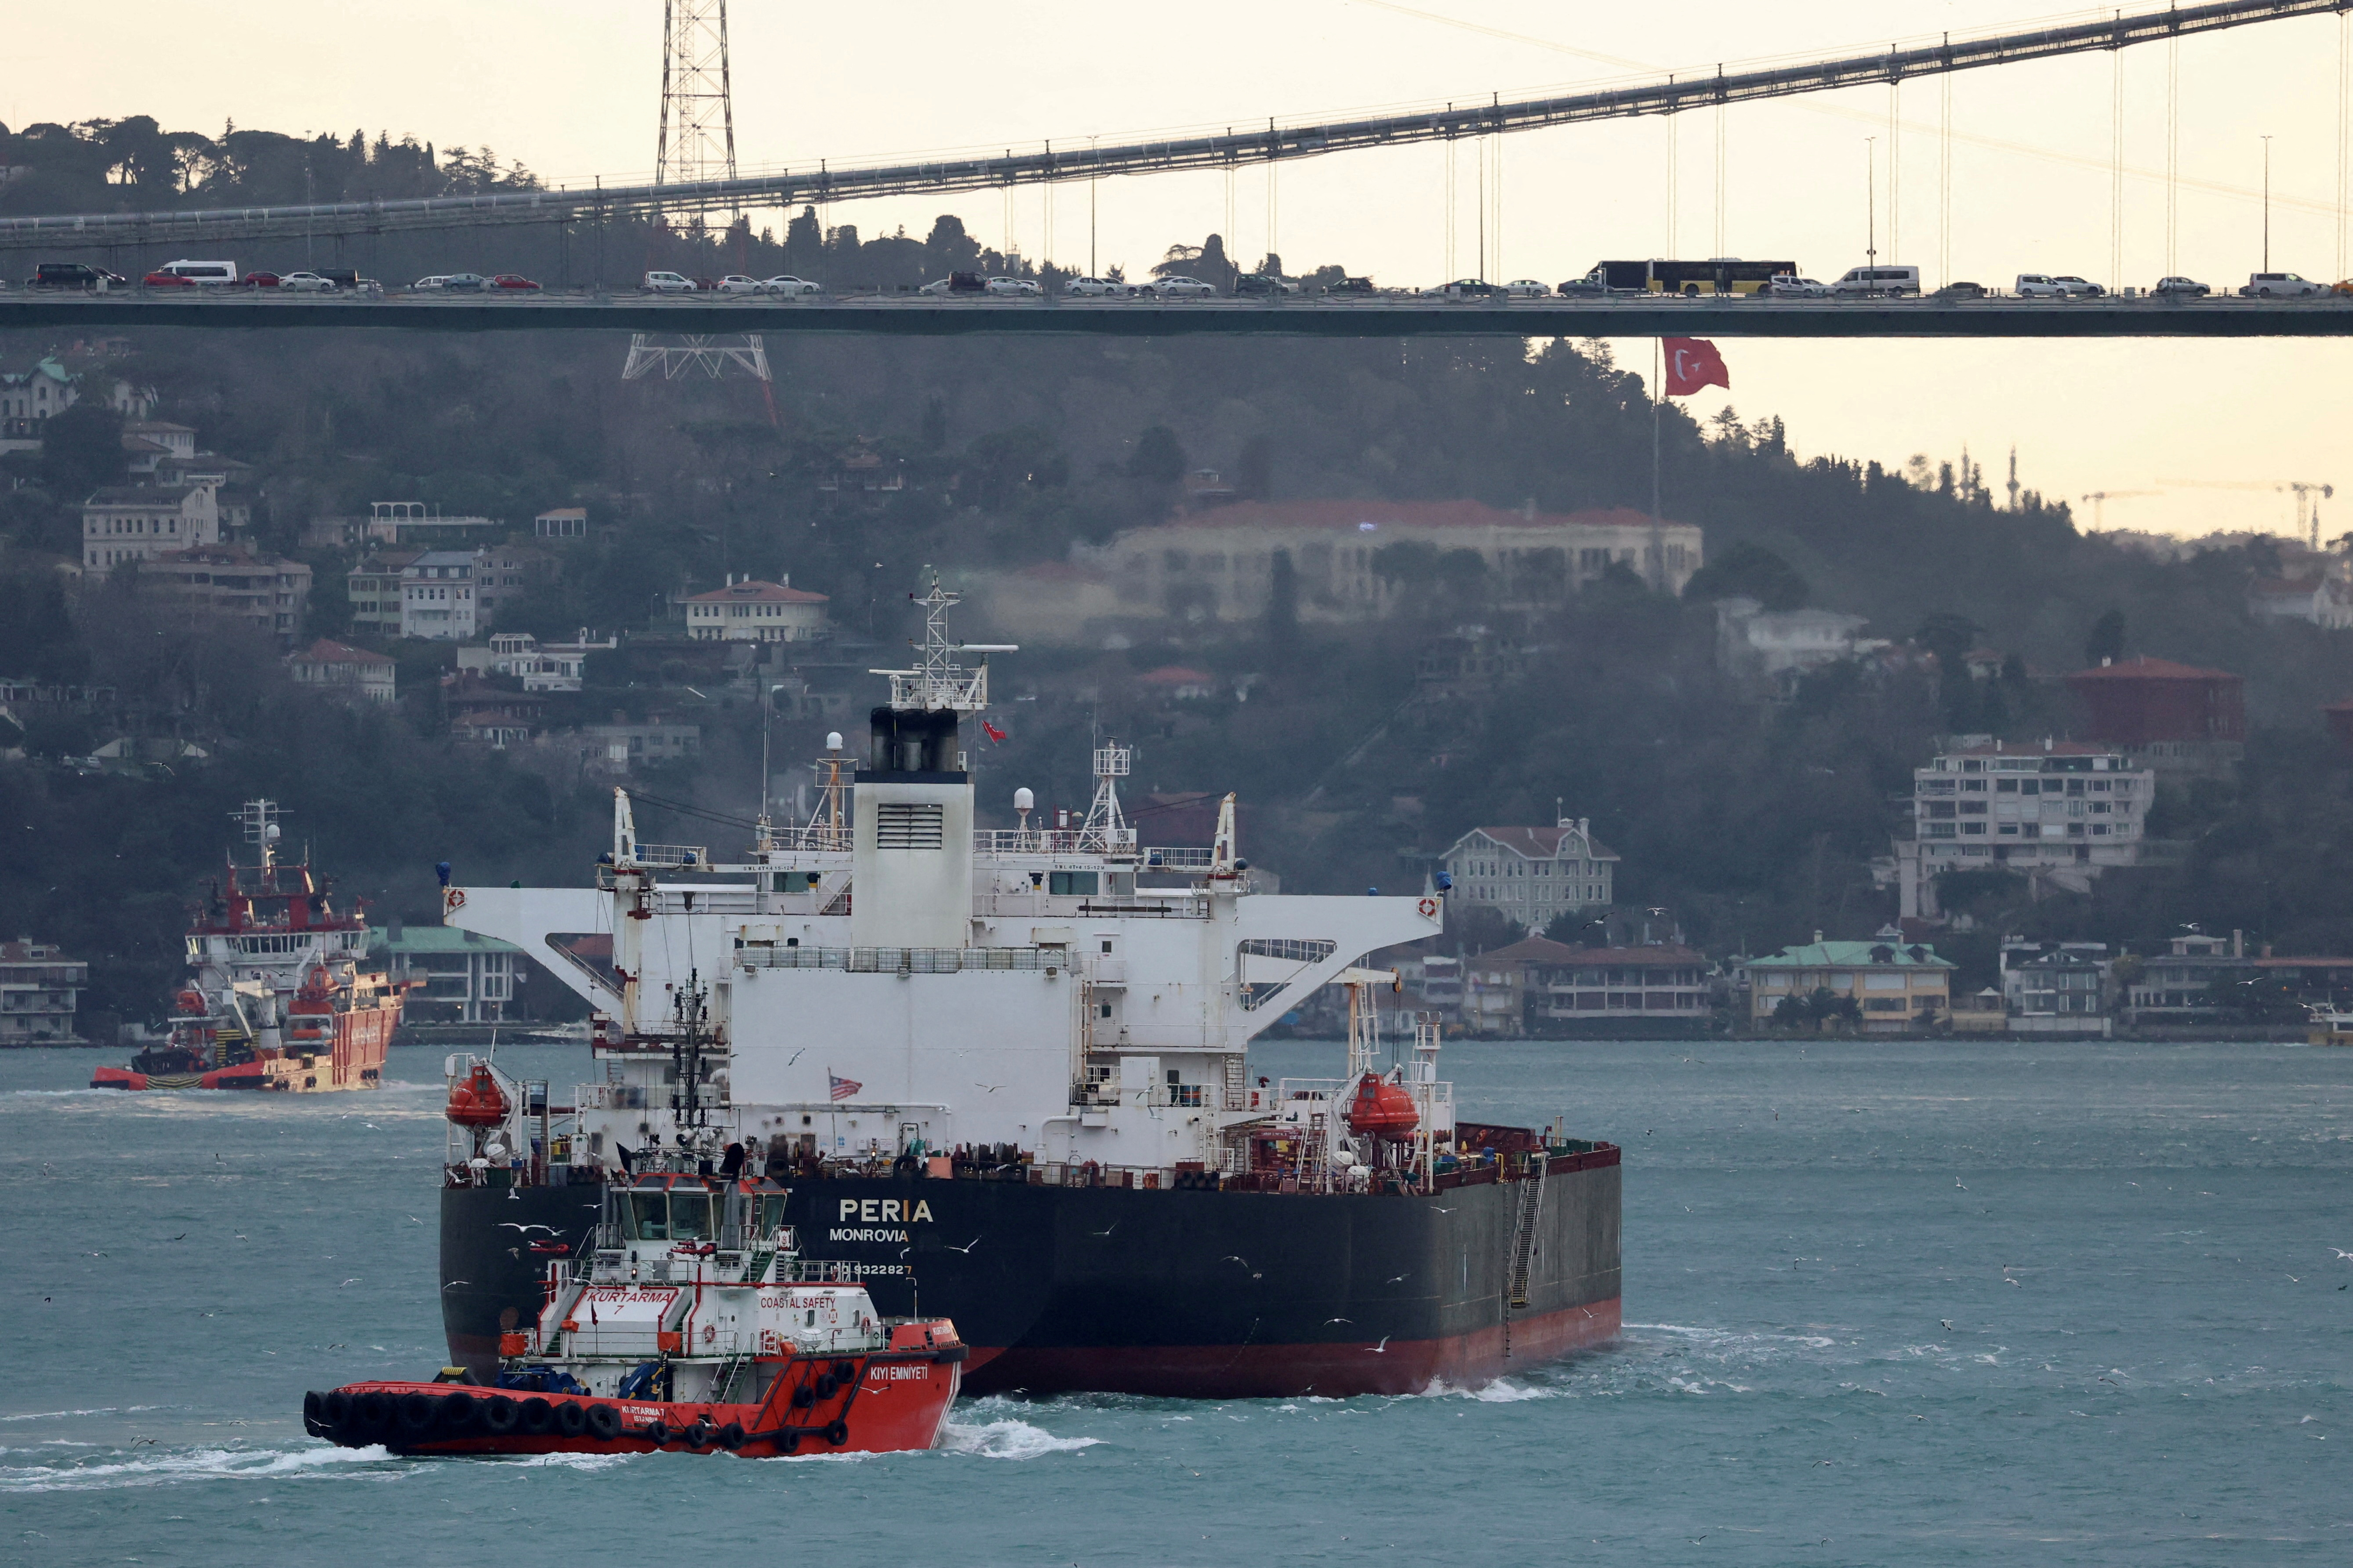 Liberia-flagged tanker Peria is escorted by a Turkish coastal safety boat as it transits Istanbul's Bosphorus